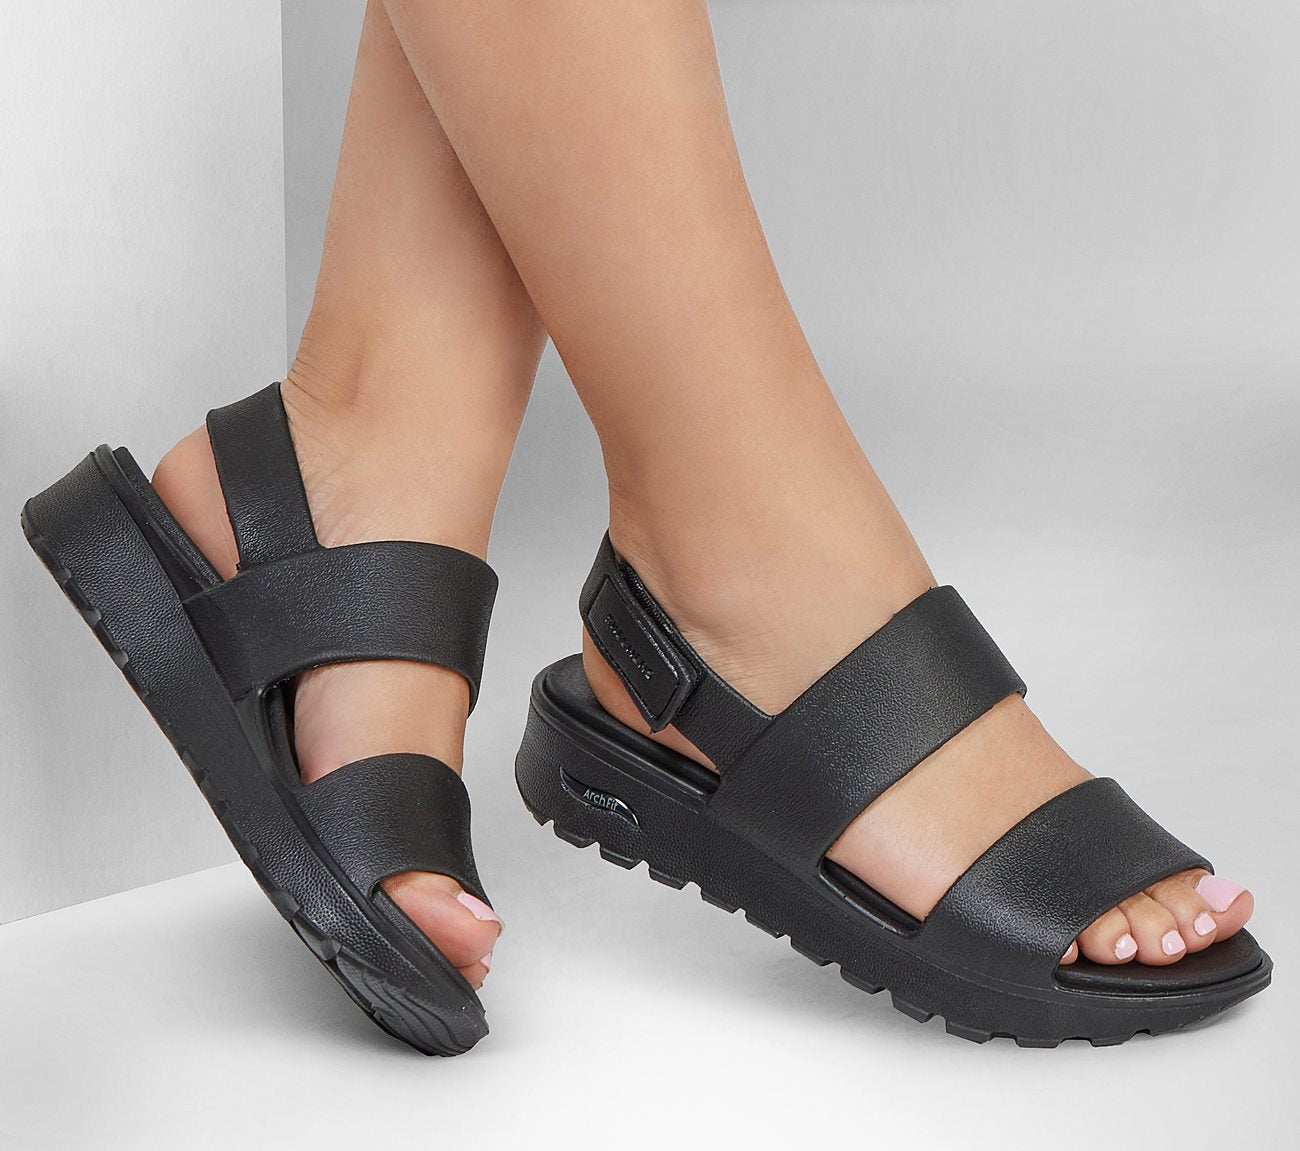 Arch Fit Footsteps - Day Dream Sandal Skechers